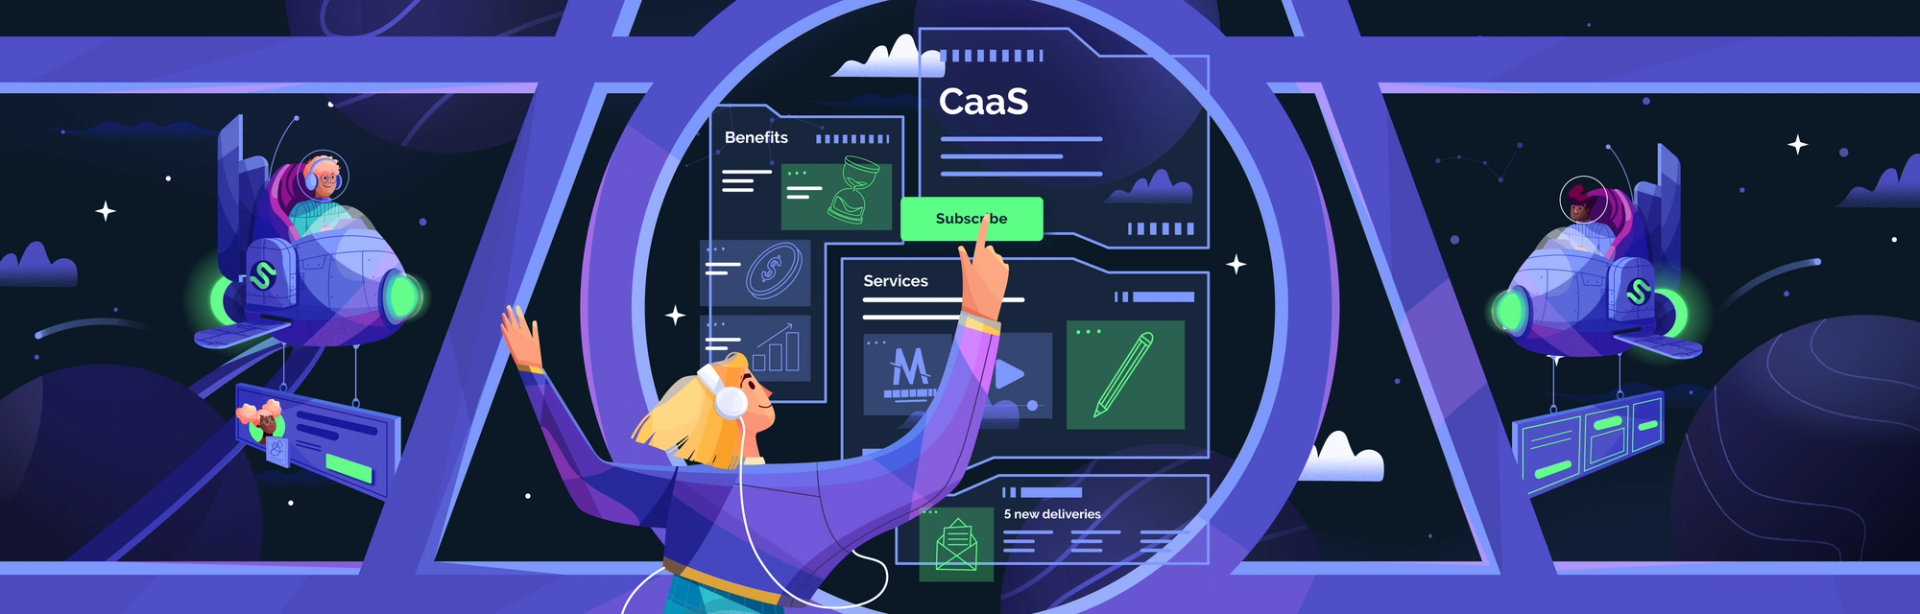 Introducing CaaS: The Better Way to Get Quality Creative on Demand and on Budget 